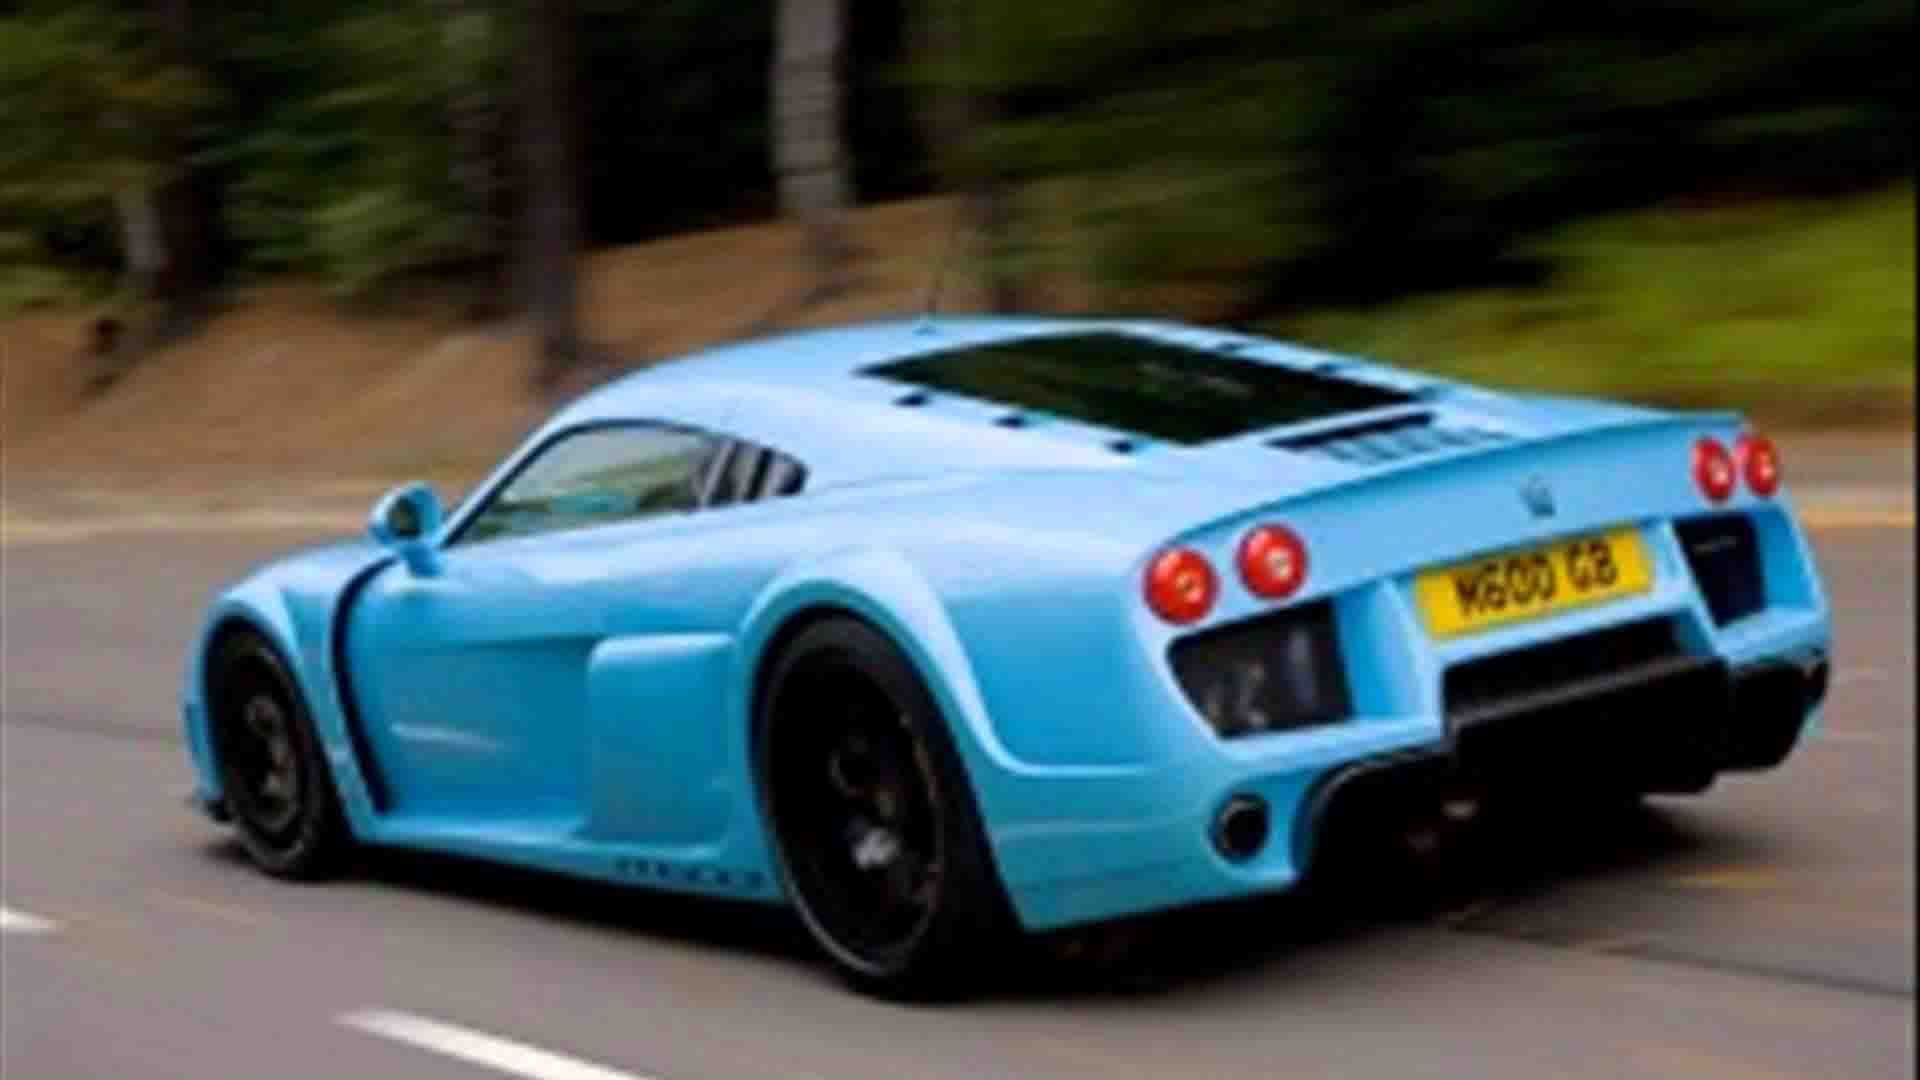 Noble M600 Picture by Jozua Chattell on FRESHWALL